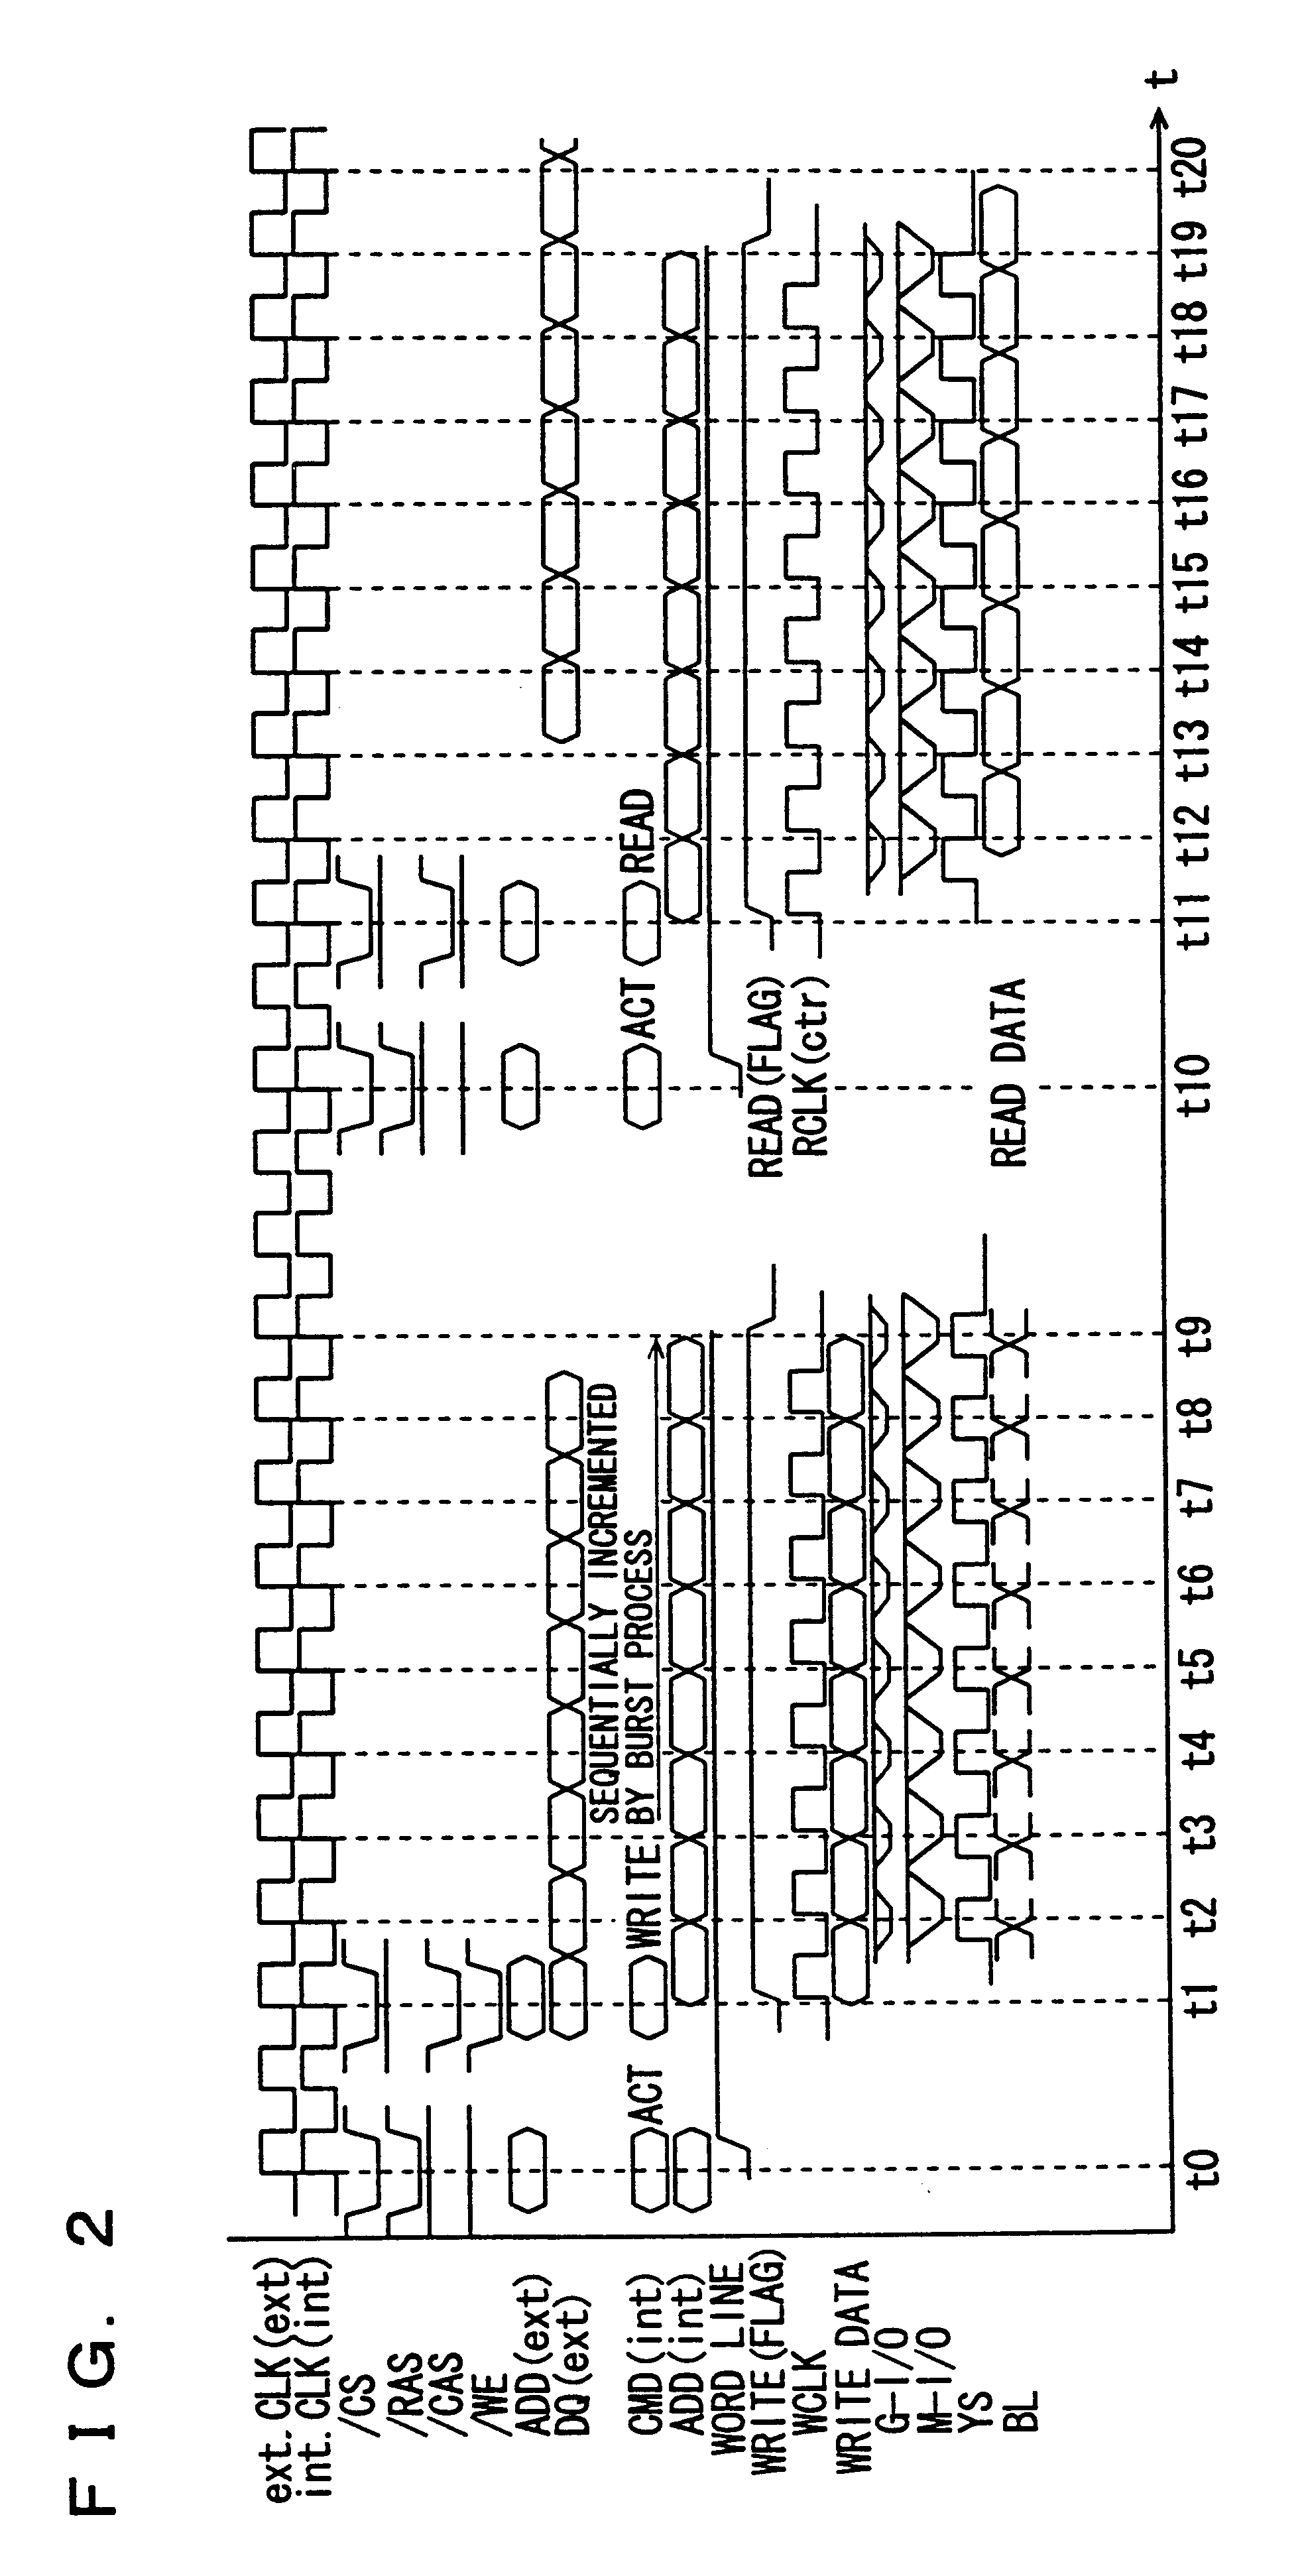 Operable synchronous semiconductor memory device switching between single data rate mode and double data rate mode